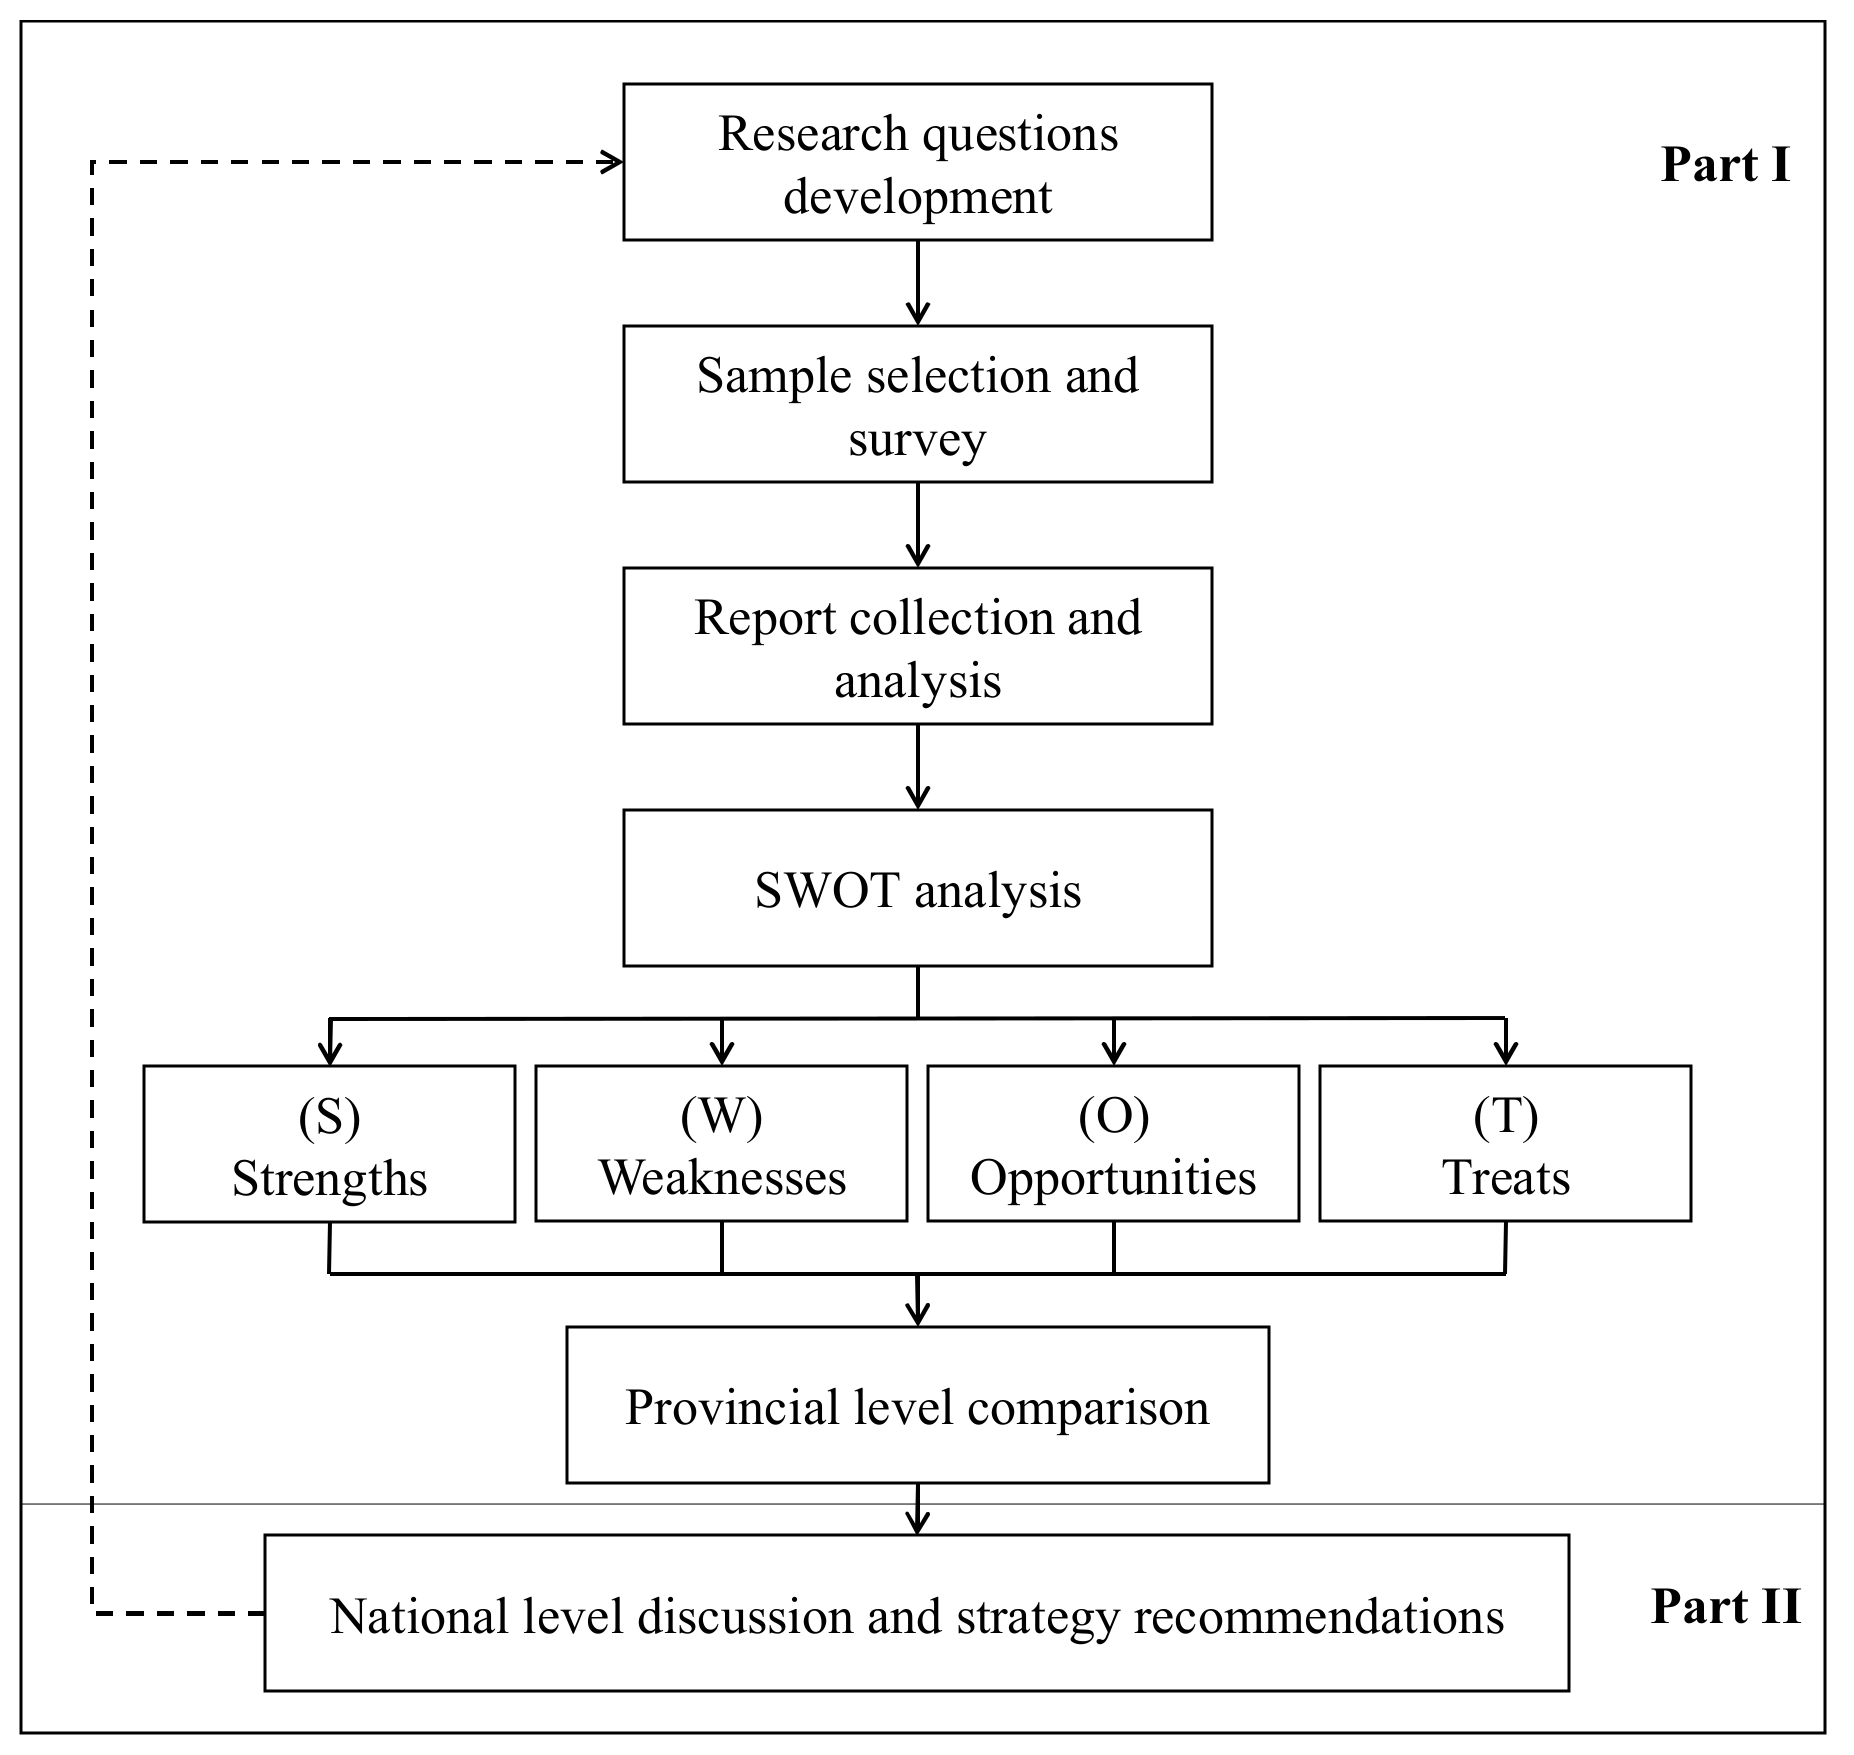 Sustainability | Free Full-Text | Regional Comparison and Strategy  Recommendations of Industrial Hemp in China Based on a SWOT Analysis